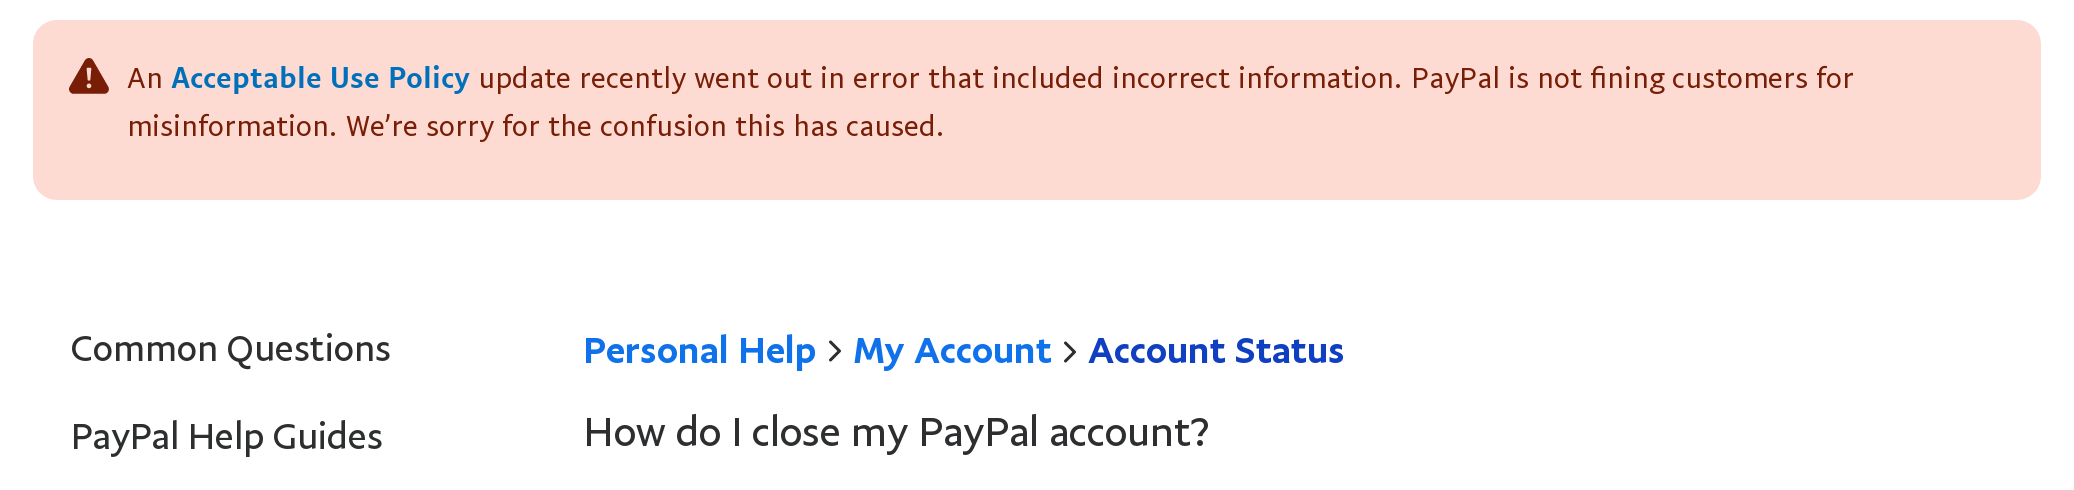 Screen shot of PayPal help website claiming the acceptable use policy went out in error and included incorrect information.